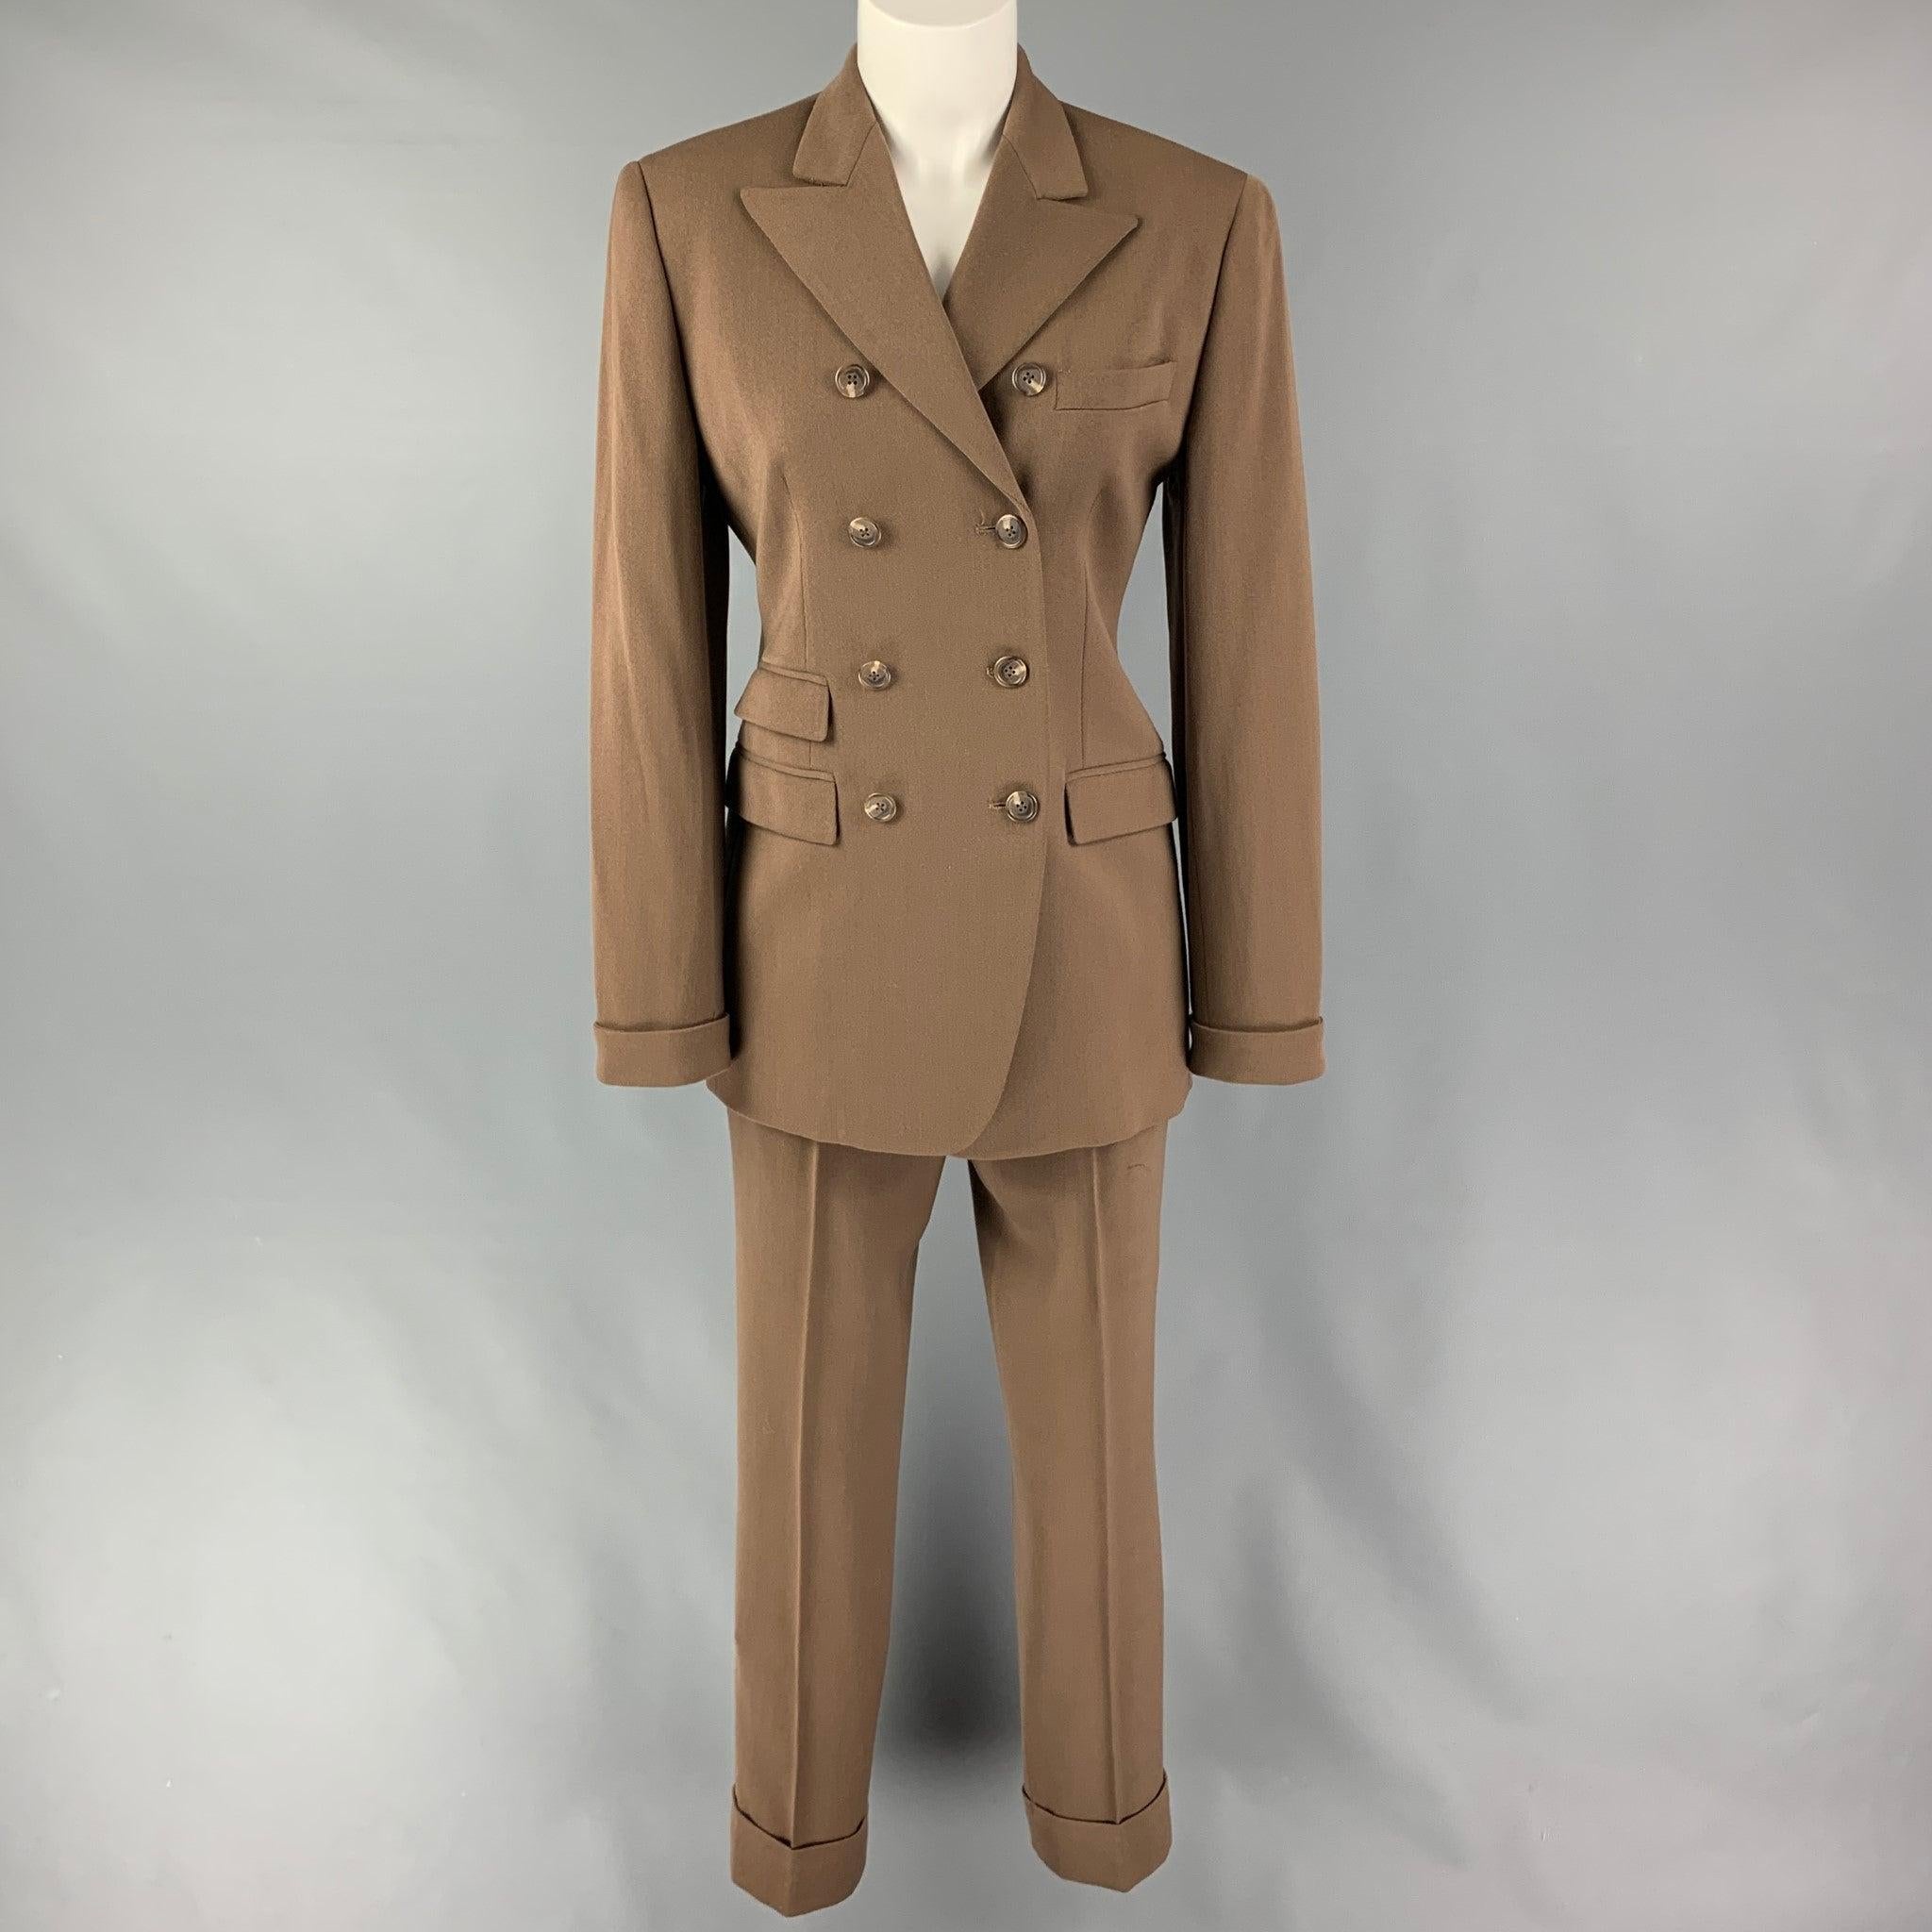 RALPH LAUREN 'Purple Label'
suit comes in a tan wool and includes a double breasted sport coat with a peak lapel and matching flat front trousers. Very Good Pre-Owned Condition. 

Marked:   4/2 

Measurements: 
  -JacketShoulder: 16.5 inches  Bust: